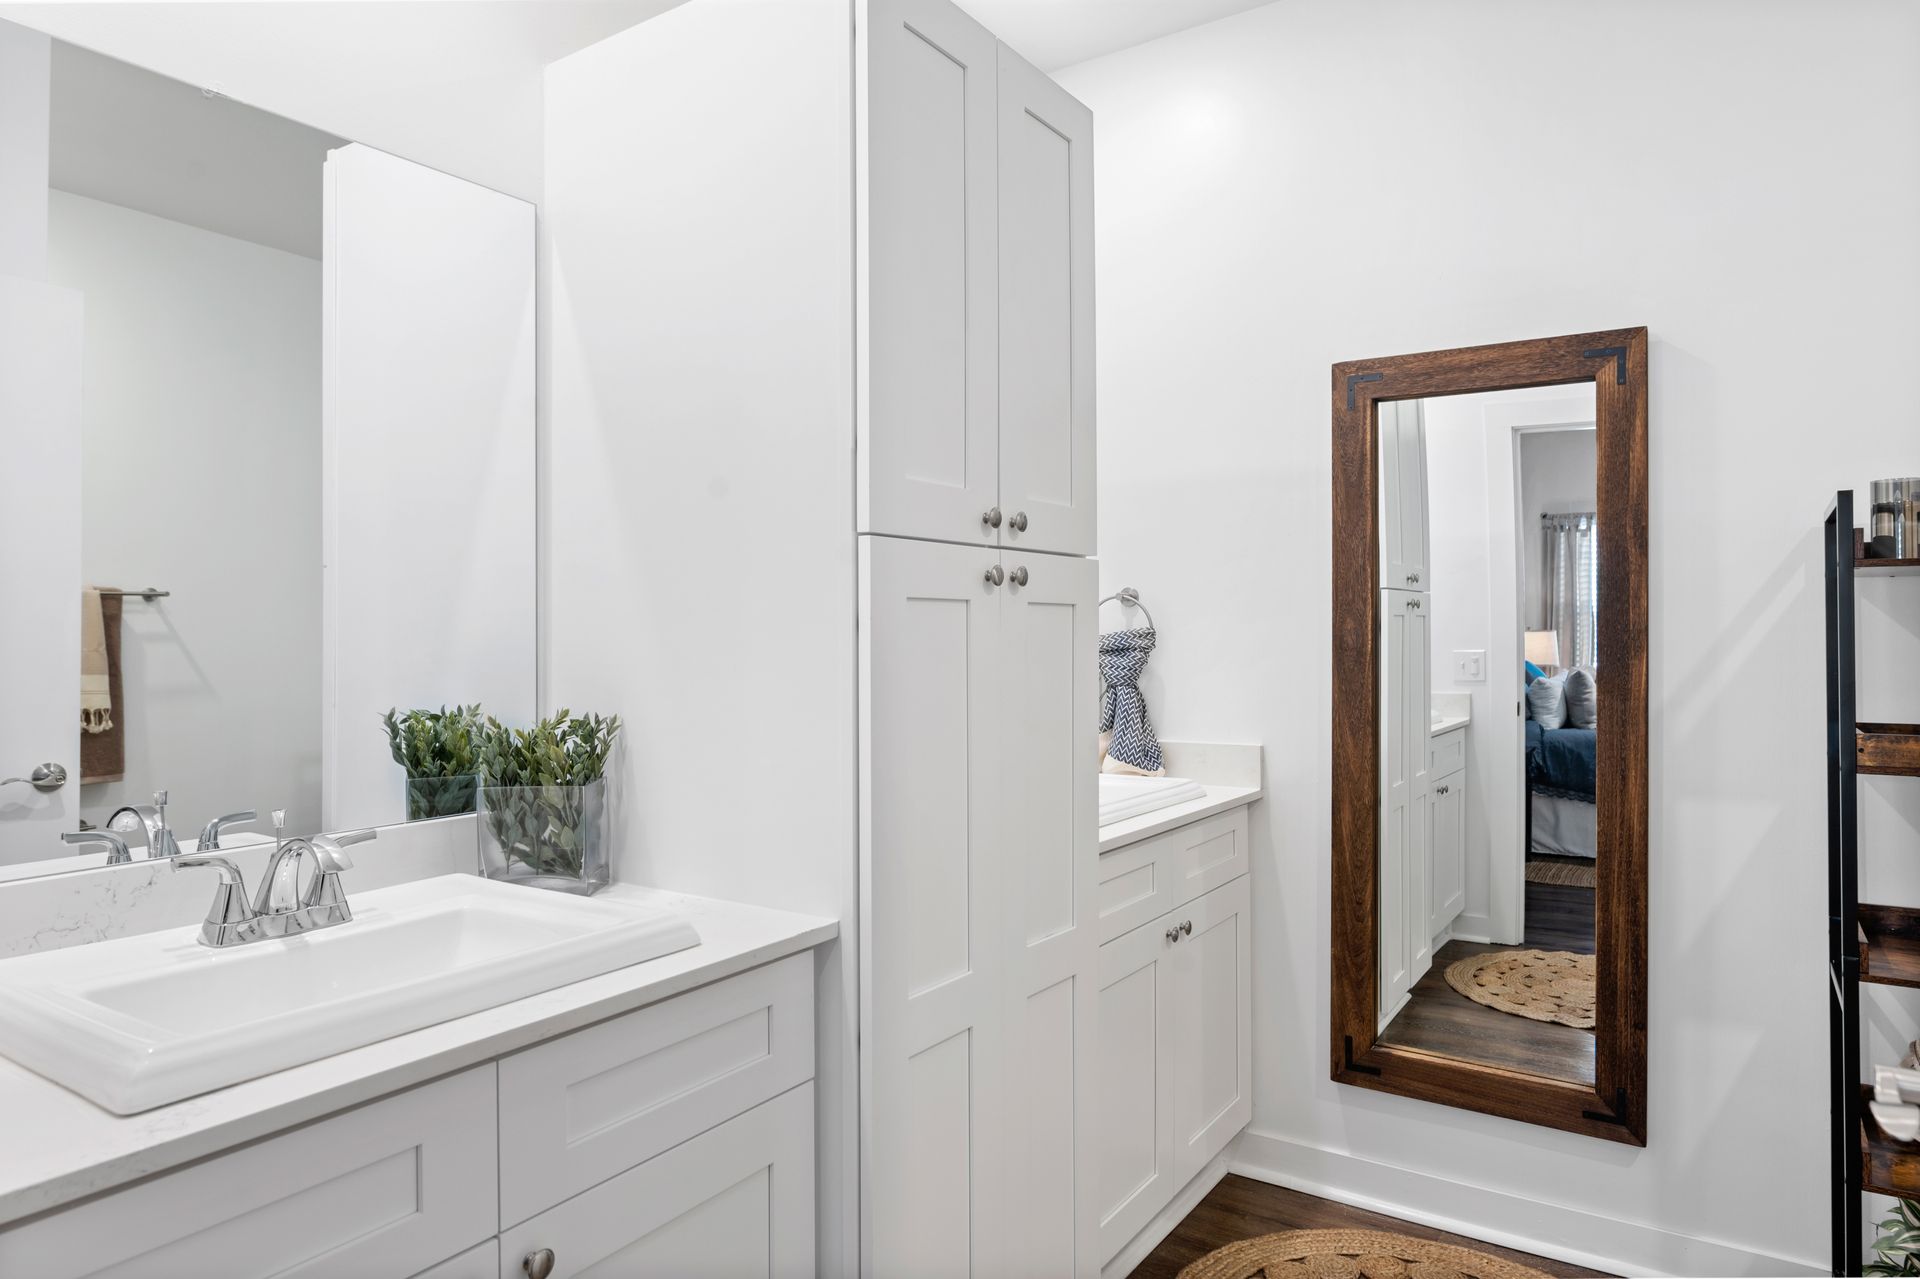 Apartment bathroom with a sink, mirror, and cabinets.